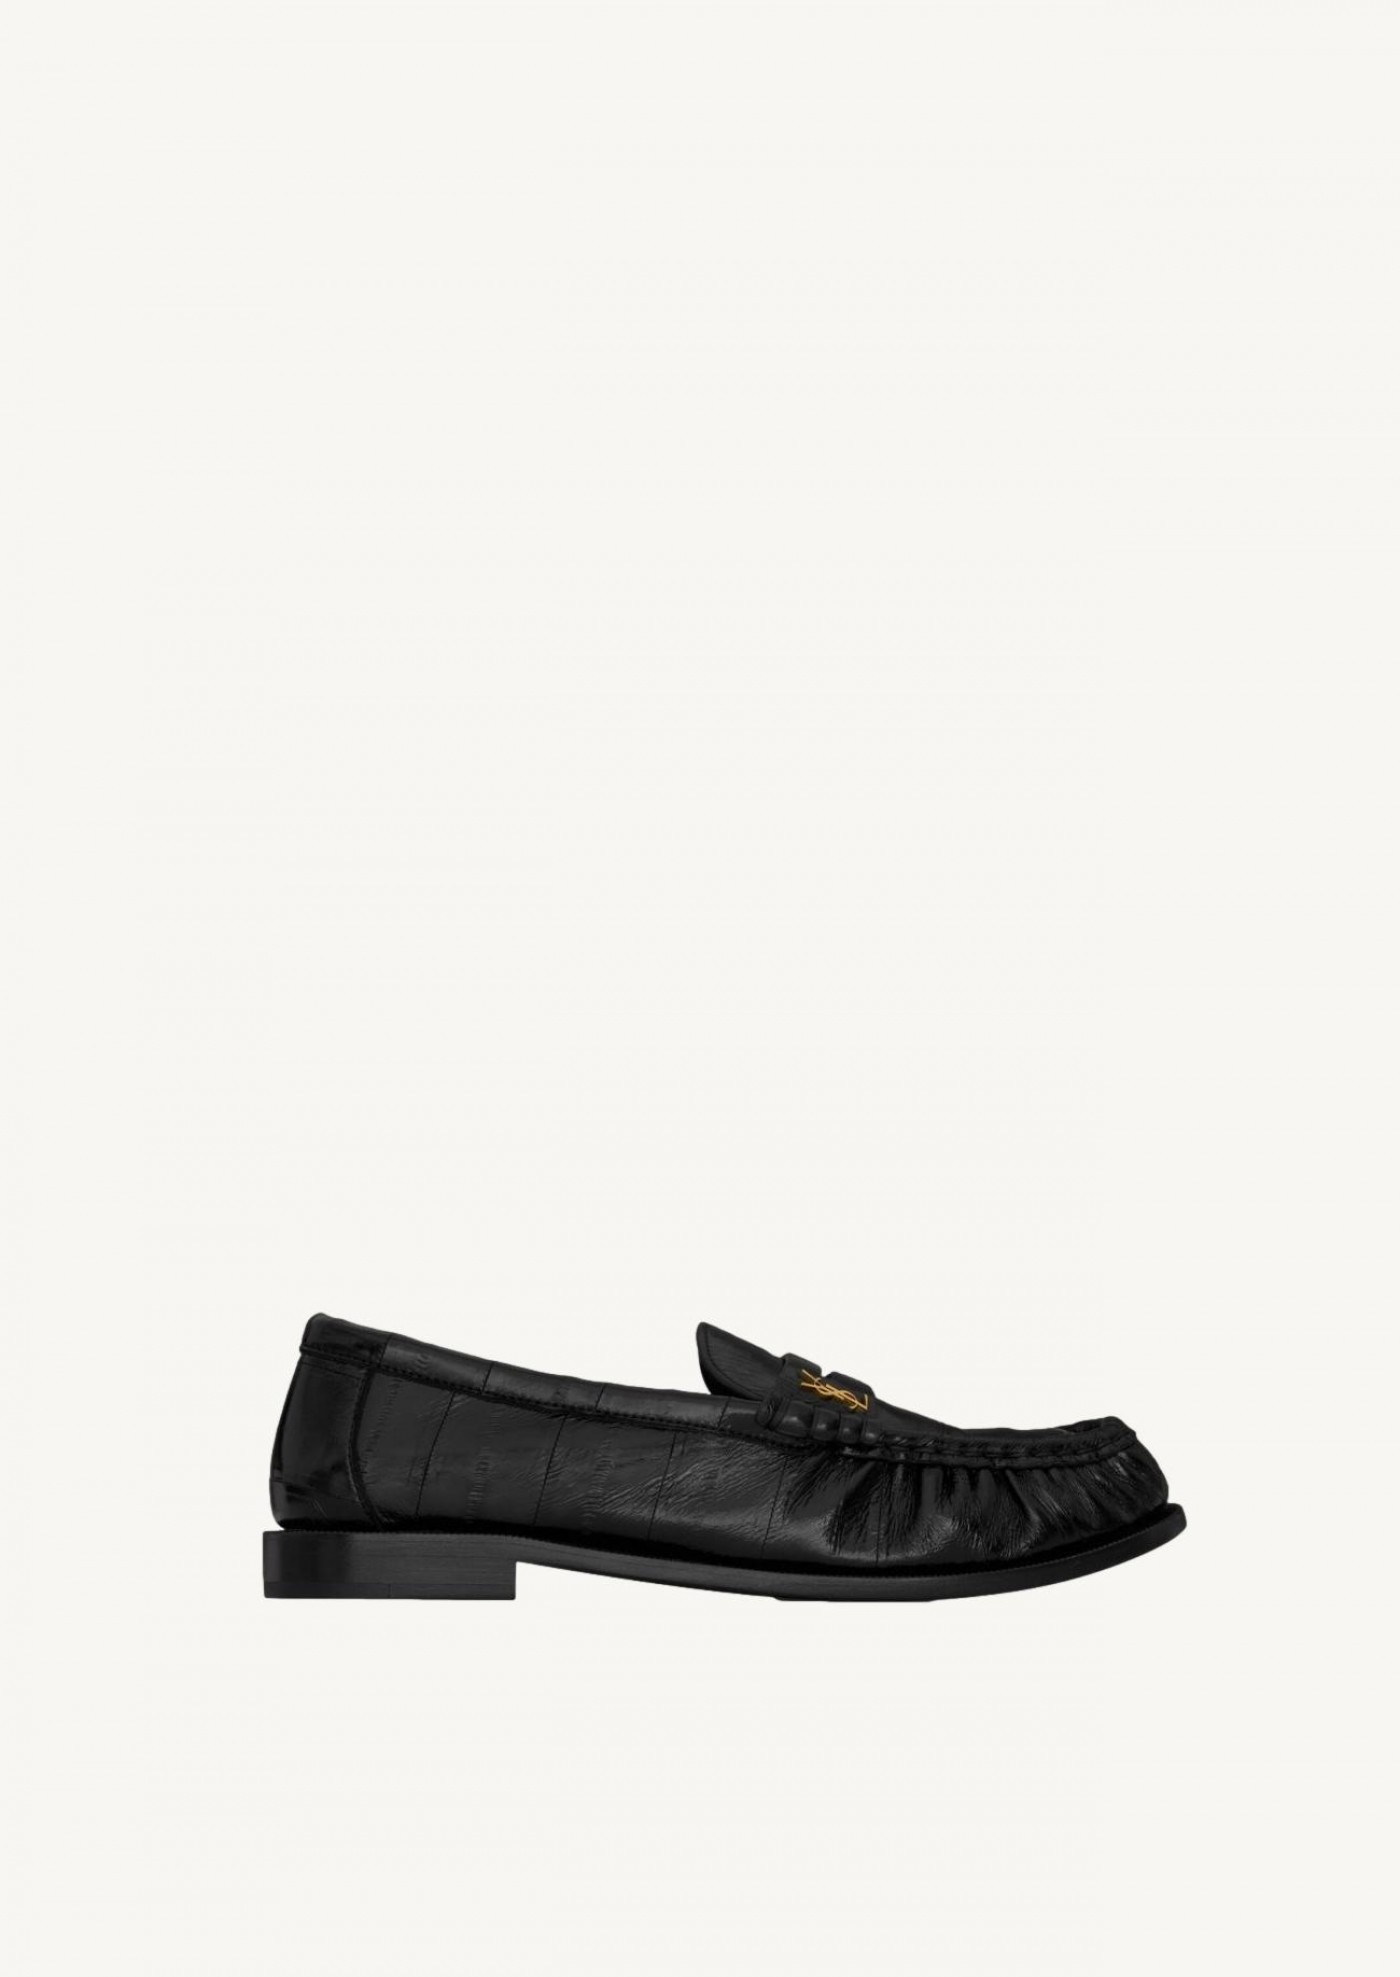 The loafer in eel leather